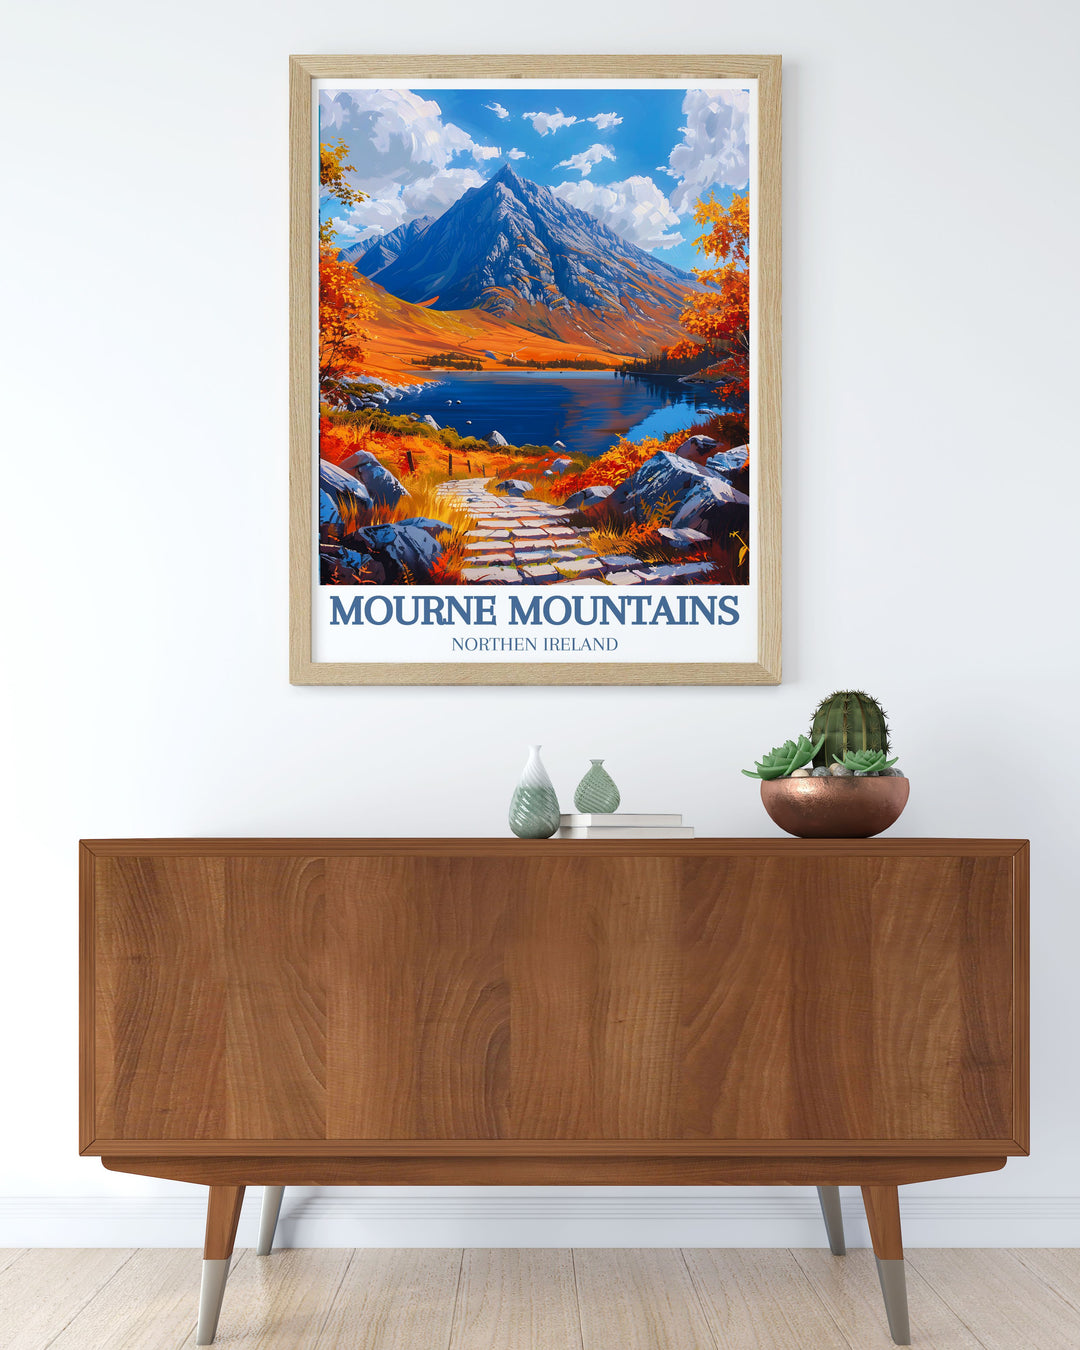 Bring the scenic beauty of the Mourne Mountains into your home with this travel poster, capturing its stunning natural landmarks and charming villages, ideal for any nature enthusiast.